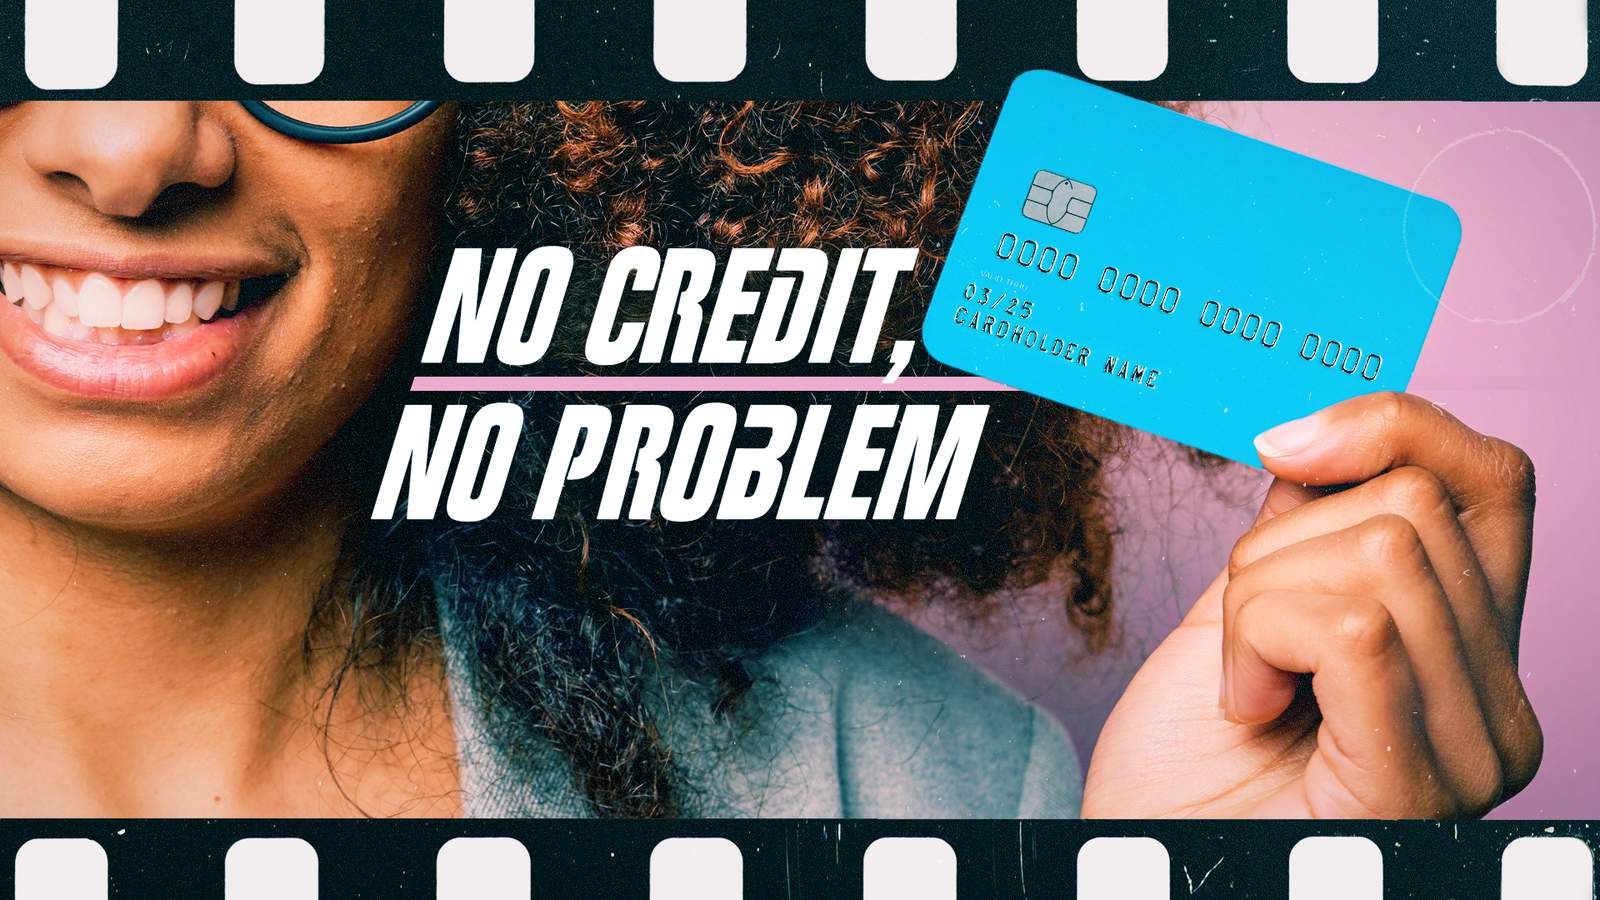 Why bad credit doesn’t have to be a life sentence